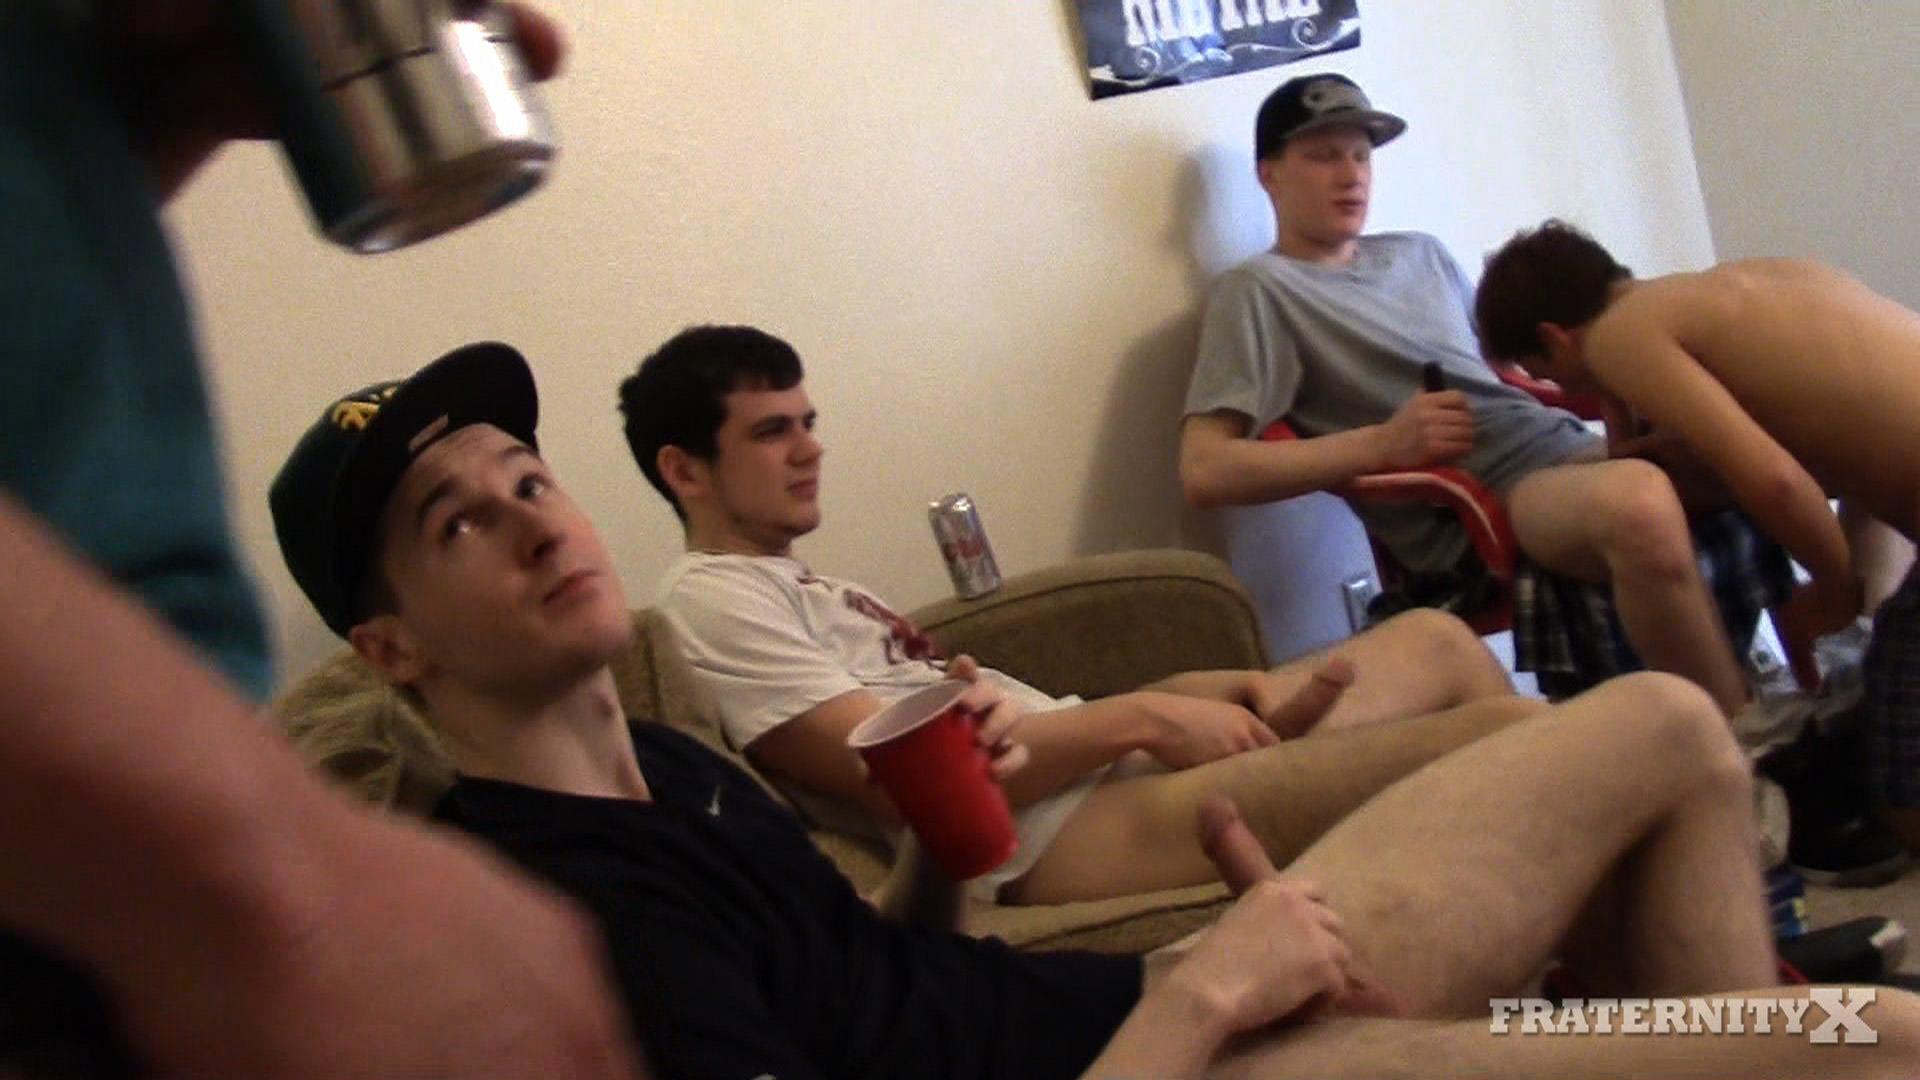 Fraternity Free Gay Porn Videos Movies 1